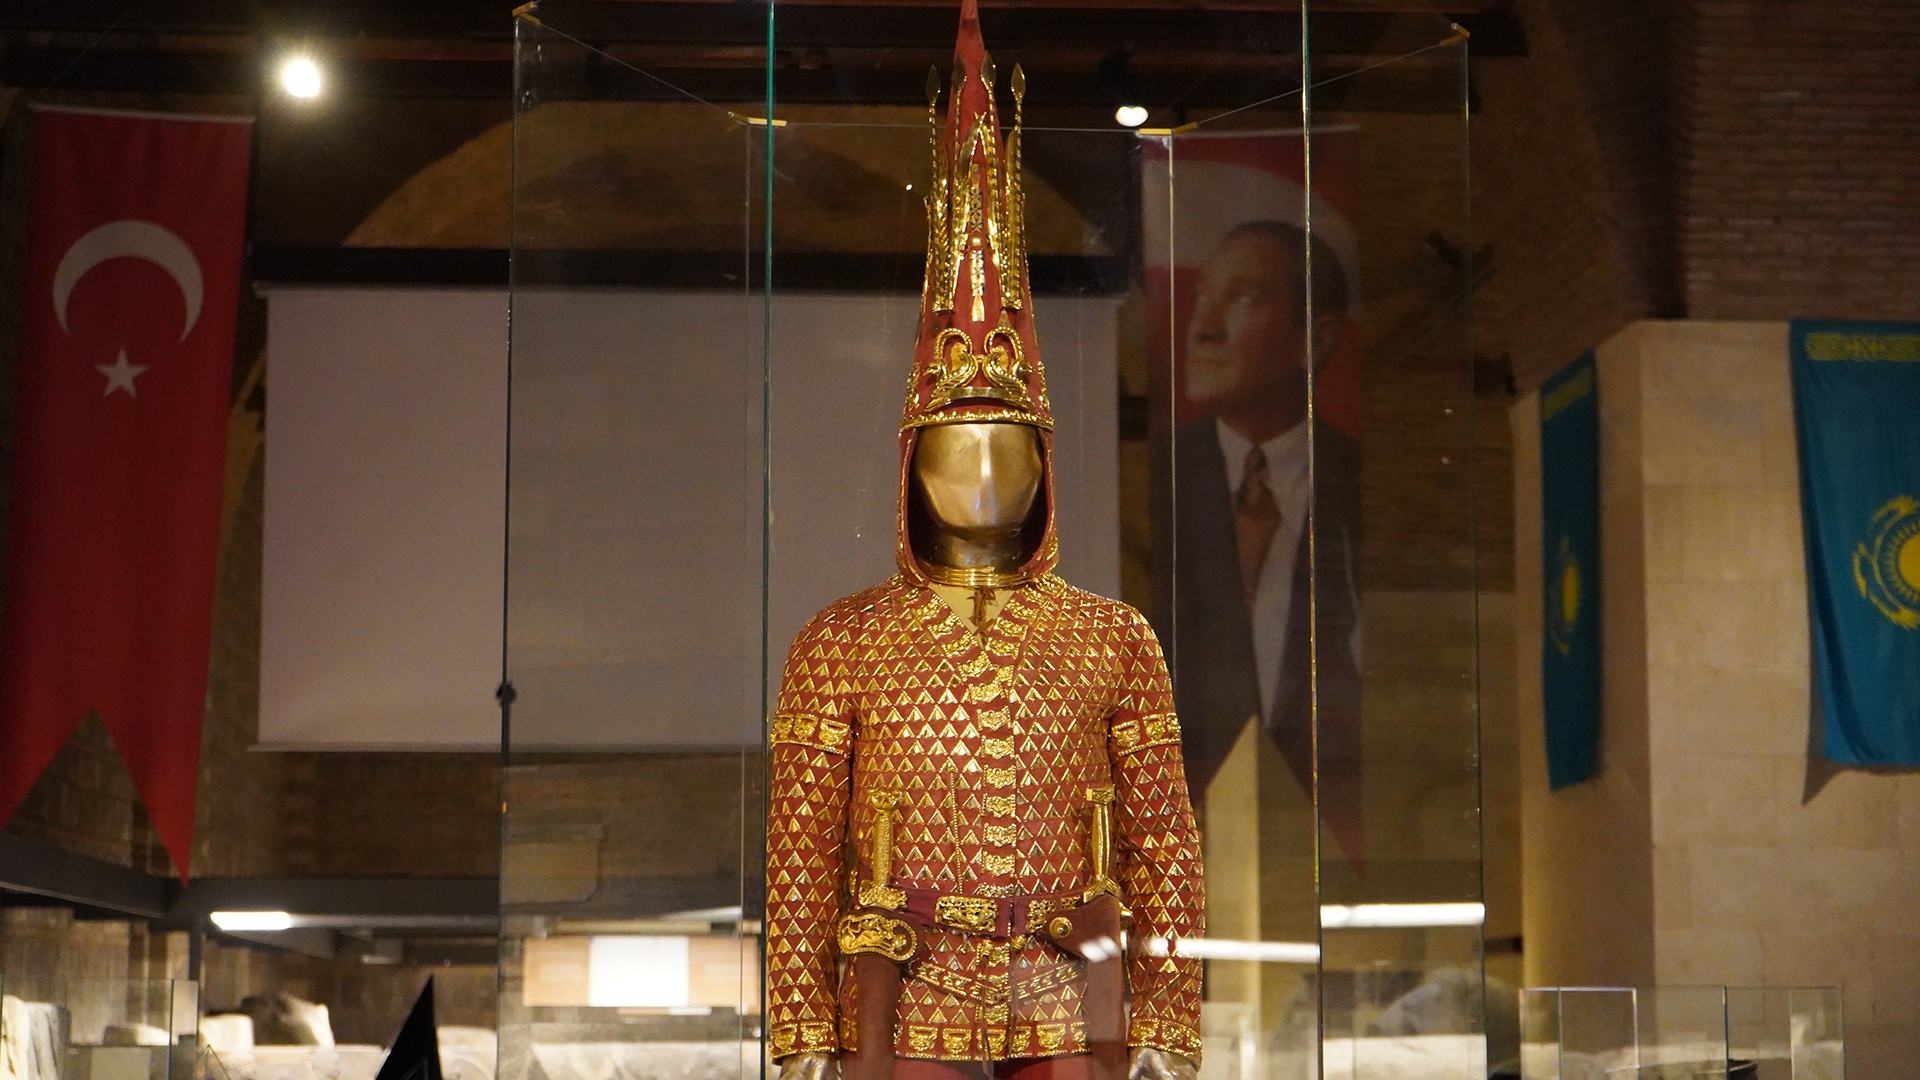 Exhibition of National Museum of Kazakhstan "The Great Steppe: History and Culture" opened in Turkey